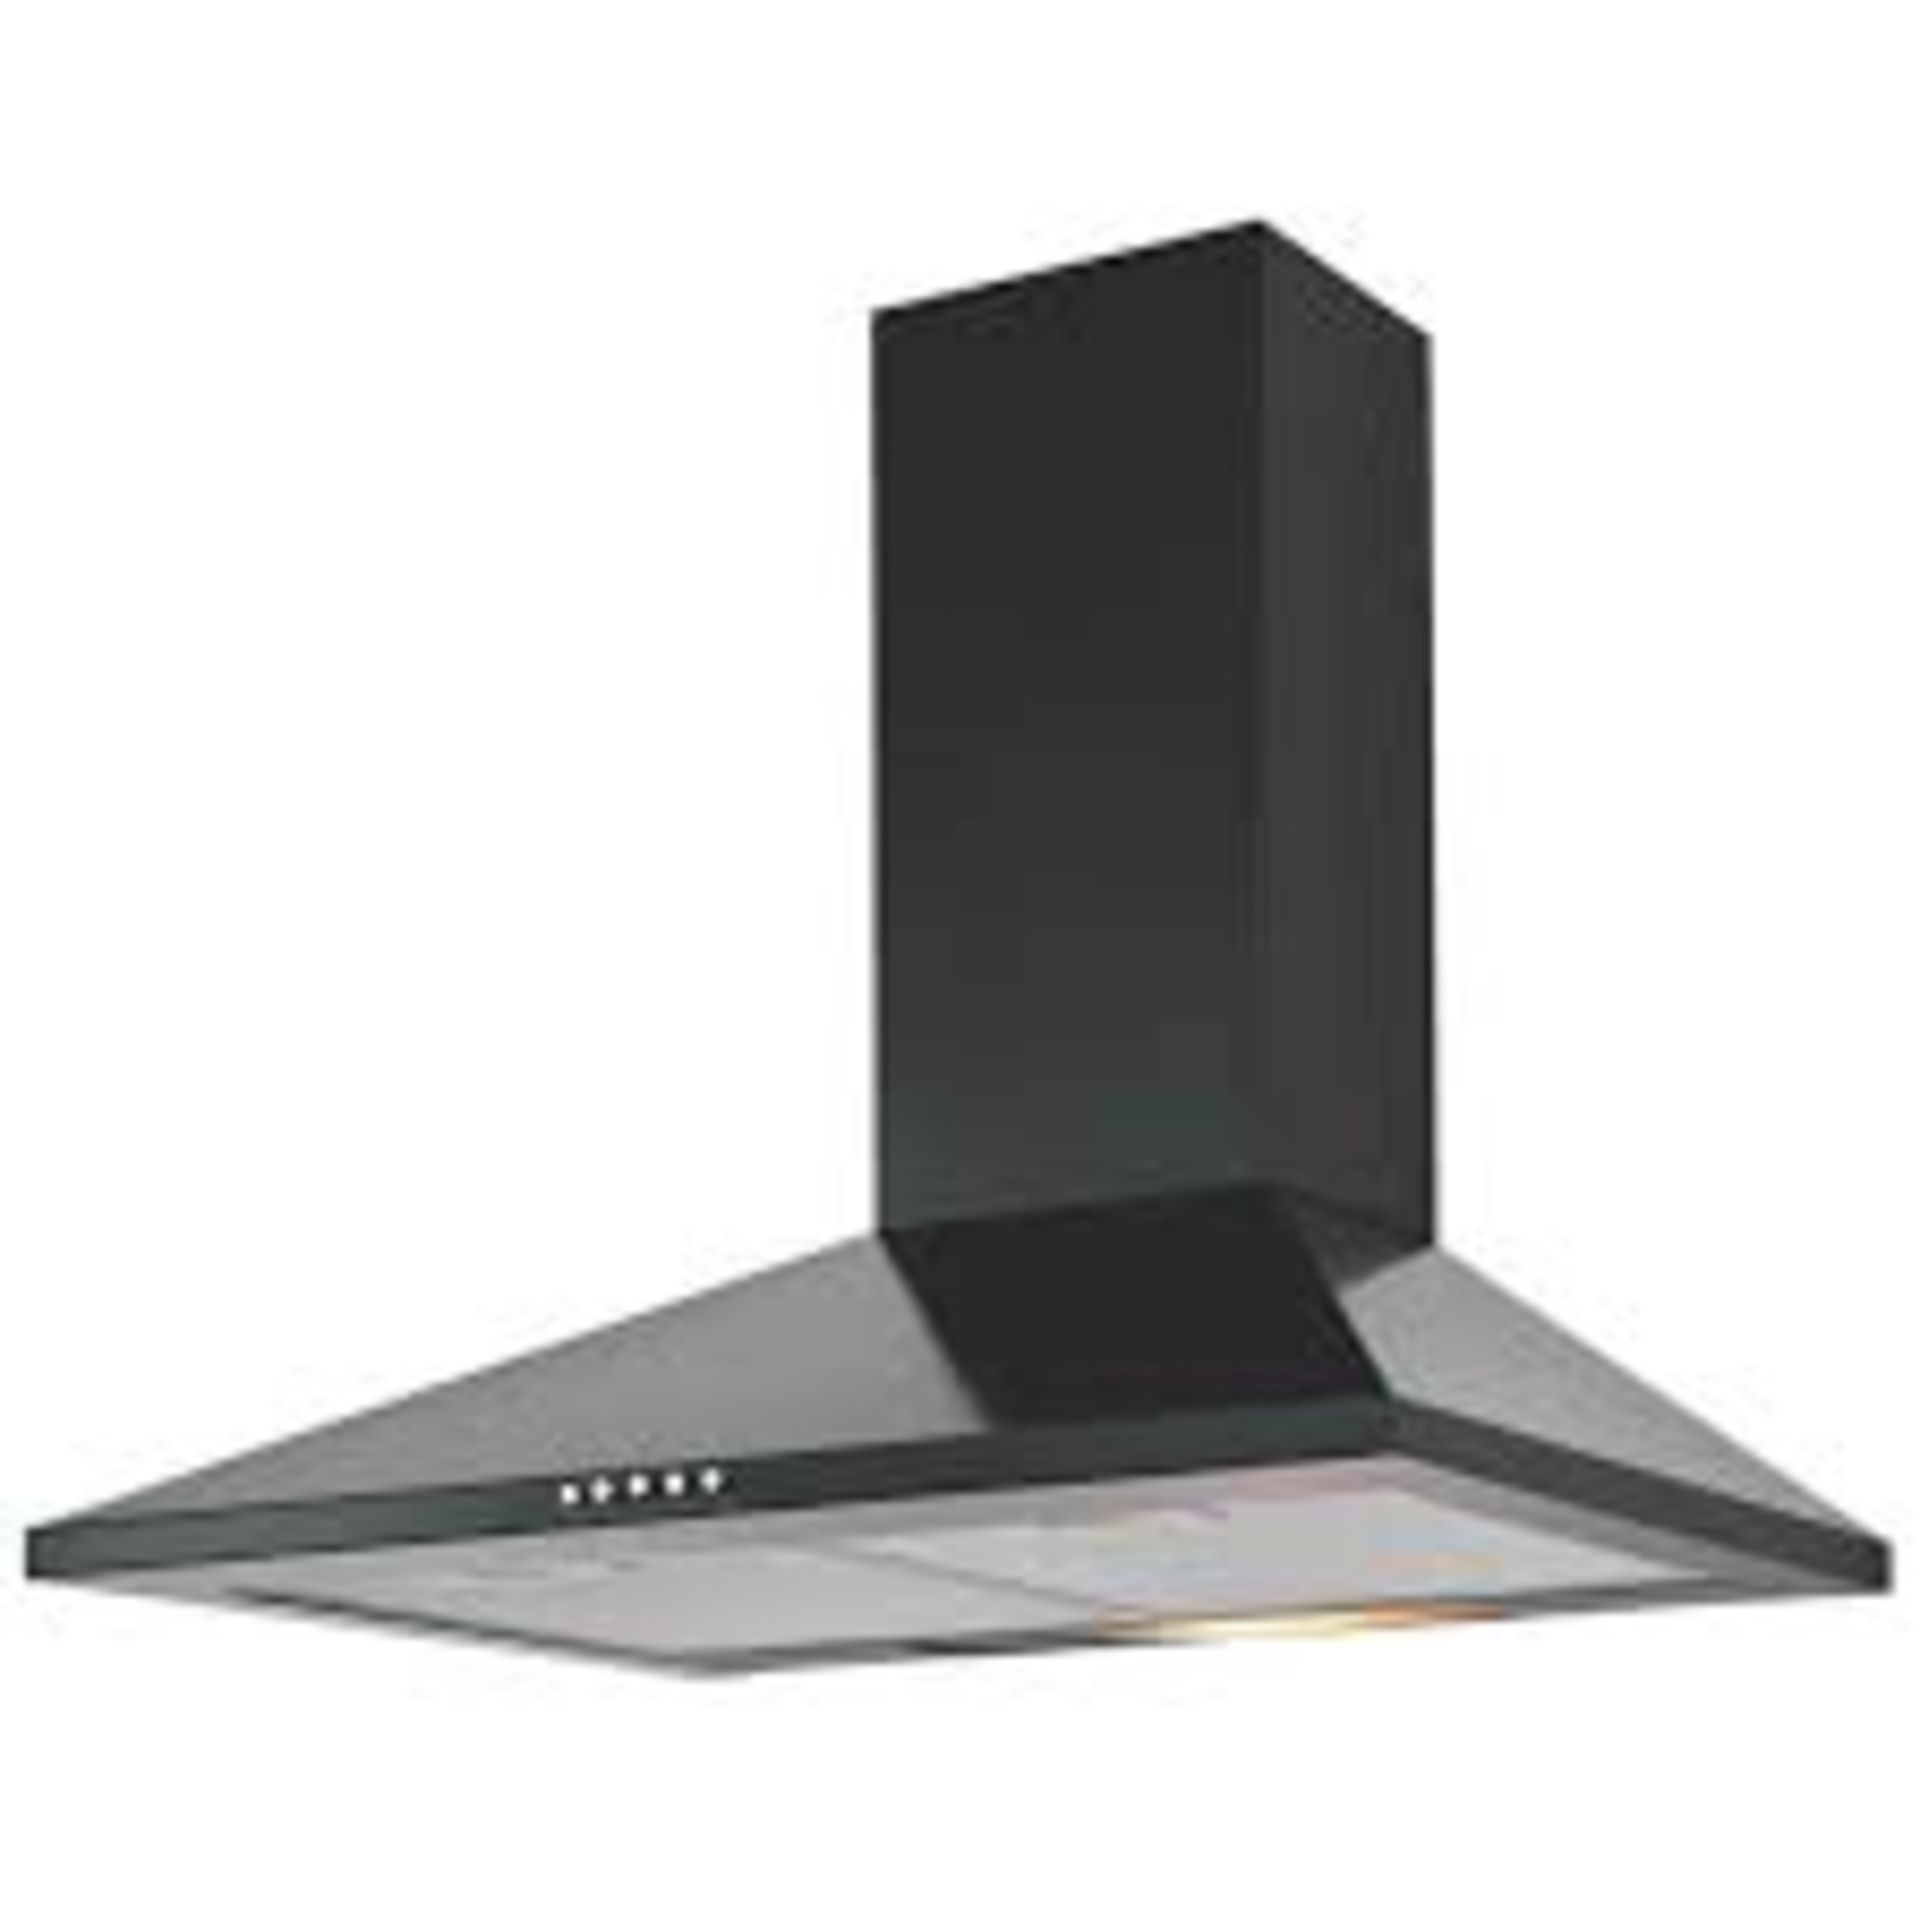 CHB60 Steel Chimney Cooker hood (W)60cm - Black. - ER23. Keep your kitchen free from cooking